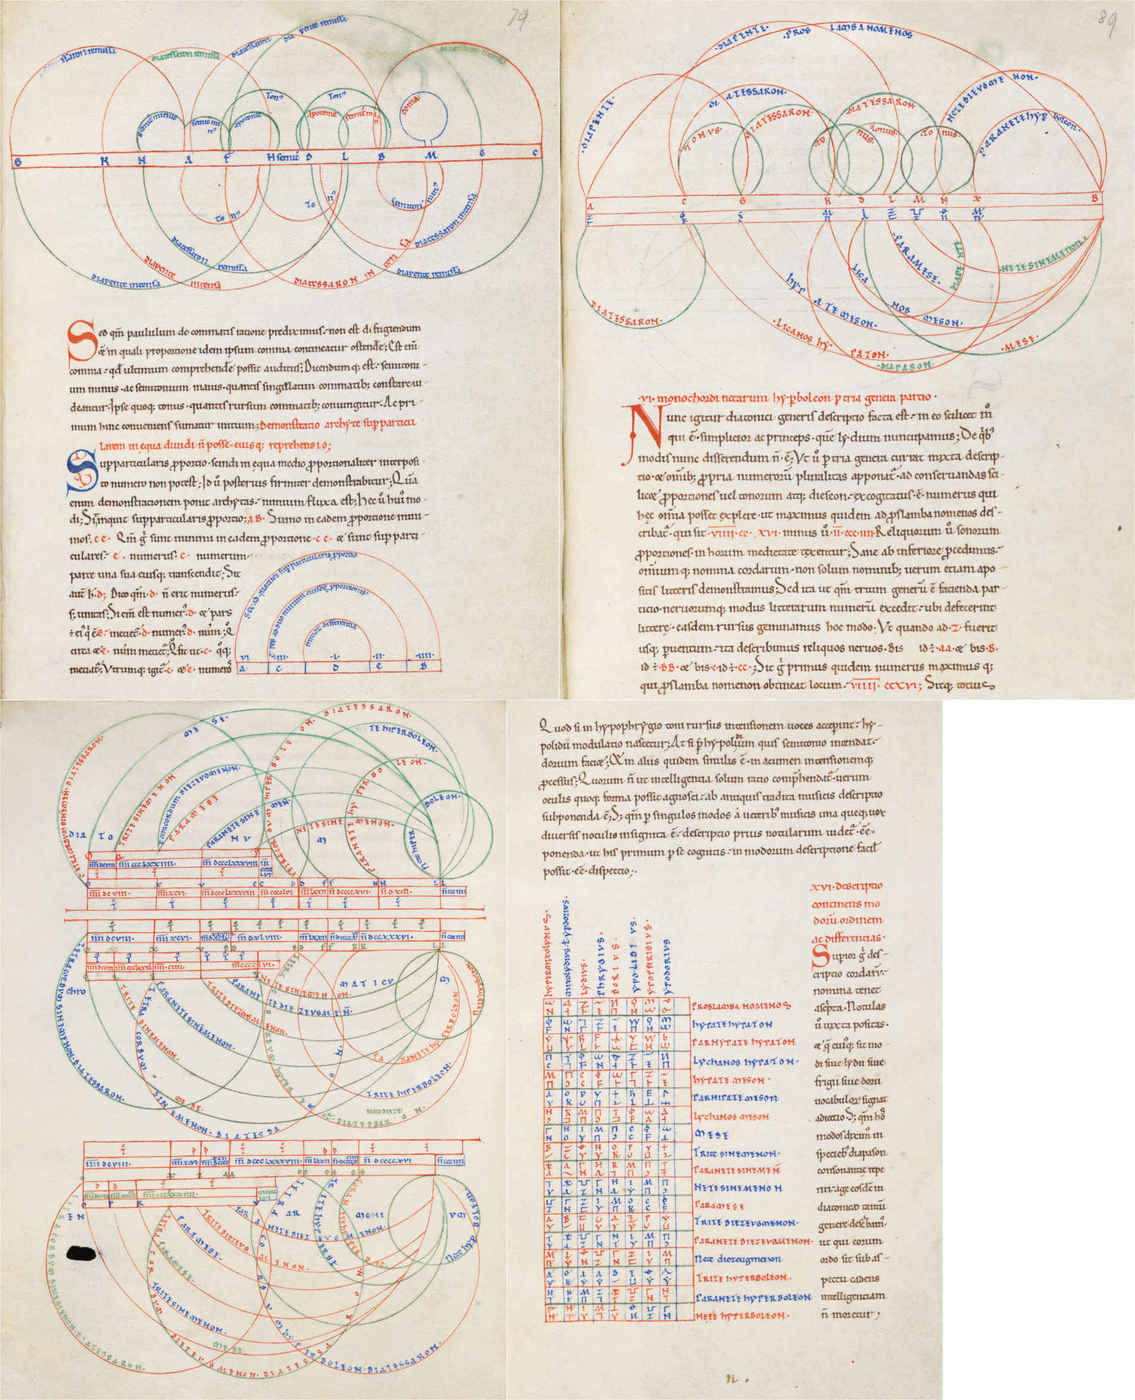 VadSlg Ms. 296 (1100s manuscript of Boethius’s De arithmetica/_De institutione musica): “The polychrome schematic illustrations in this 12th century manuscript are particularly carefully made.” Indeed. This image combines pages 79/89/93/99, which show off the diagrams, tables, drop caps, and rubricated text employed in the discussion of music theory & multiplication.